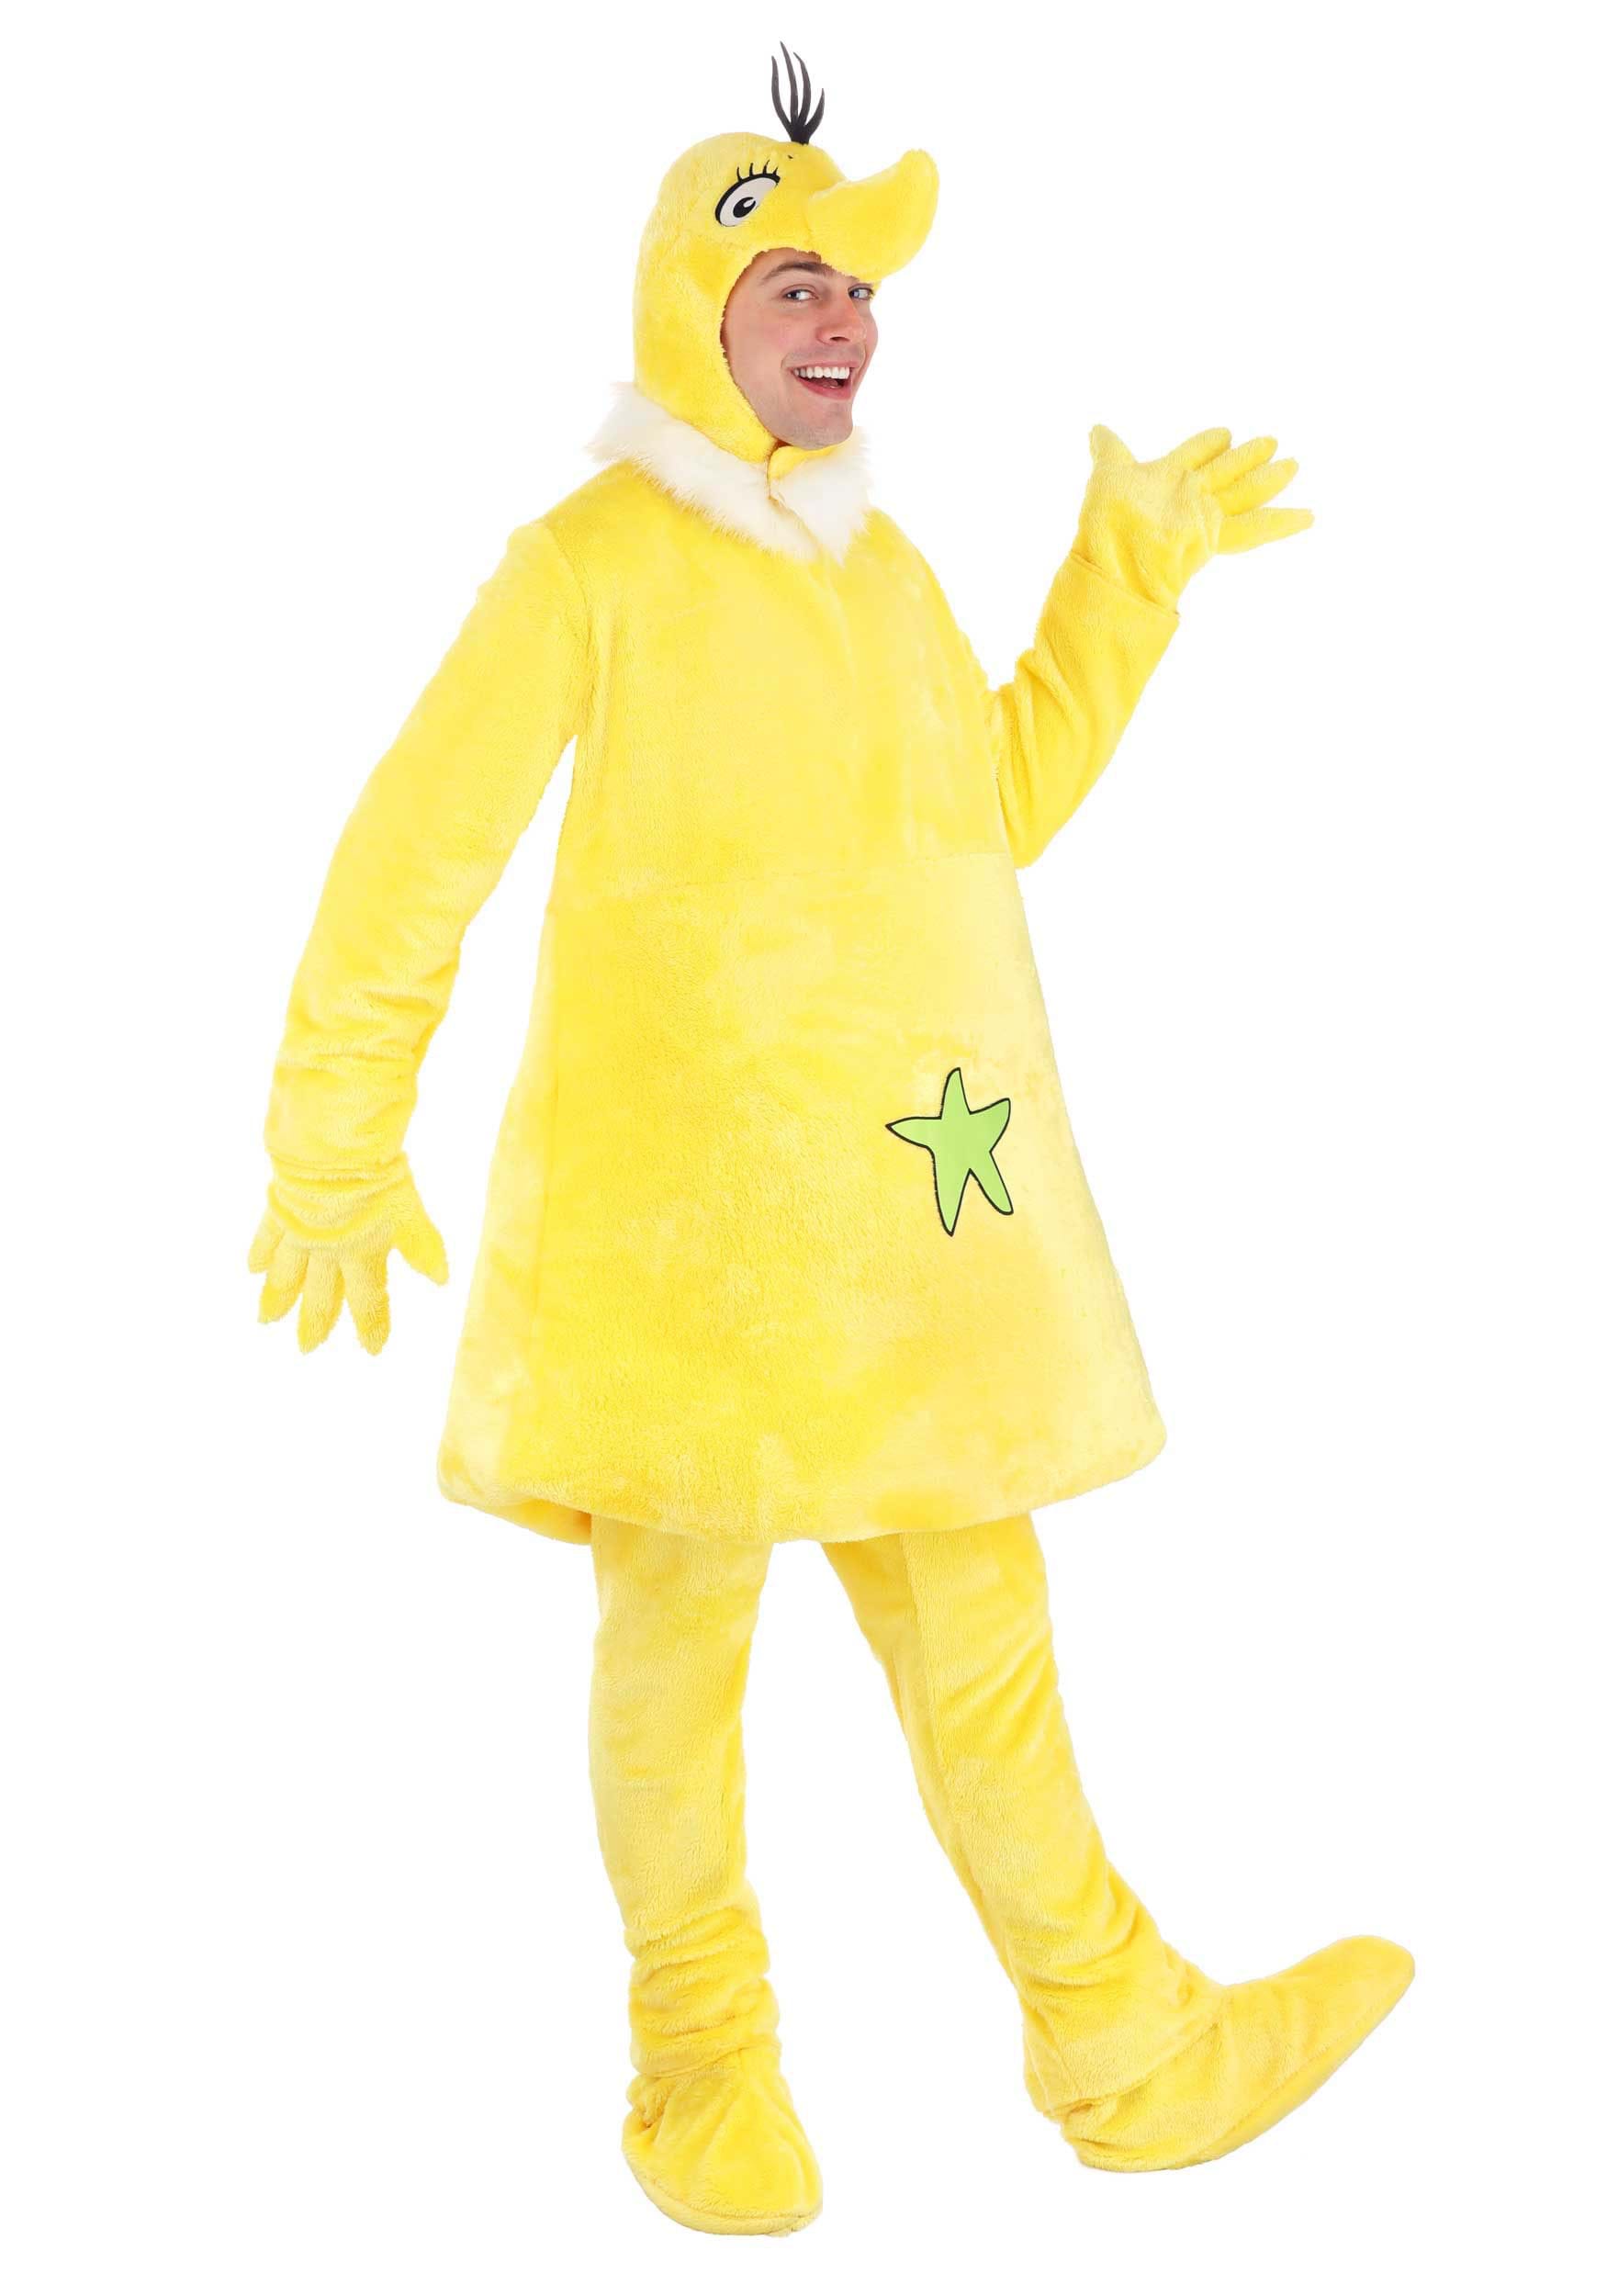 Dr. Seuss Star Bellied Sneetch Costume for Adults | Dr. Seuss Costumes